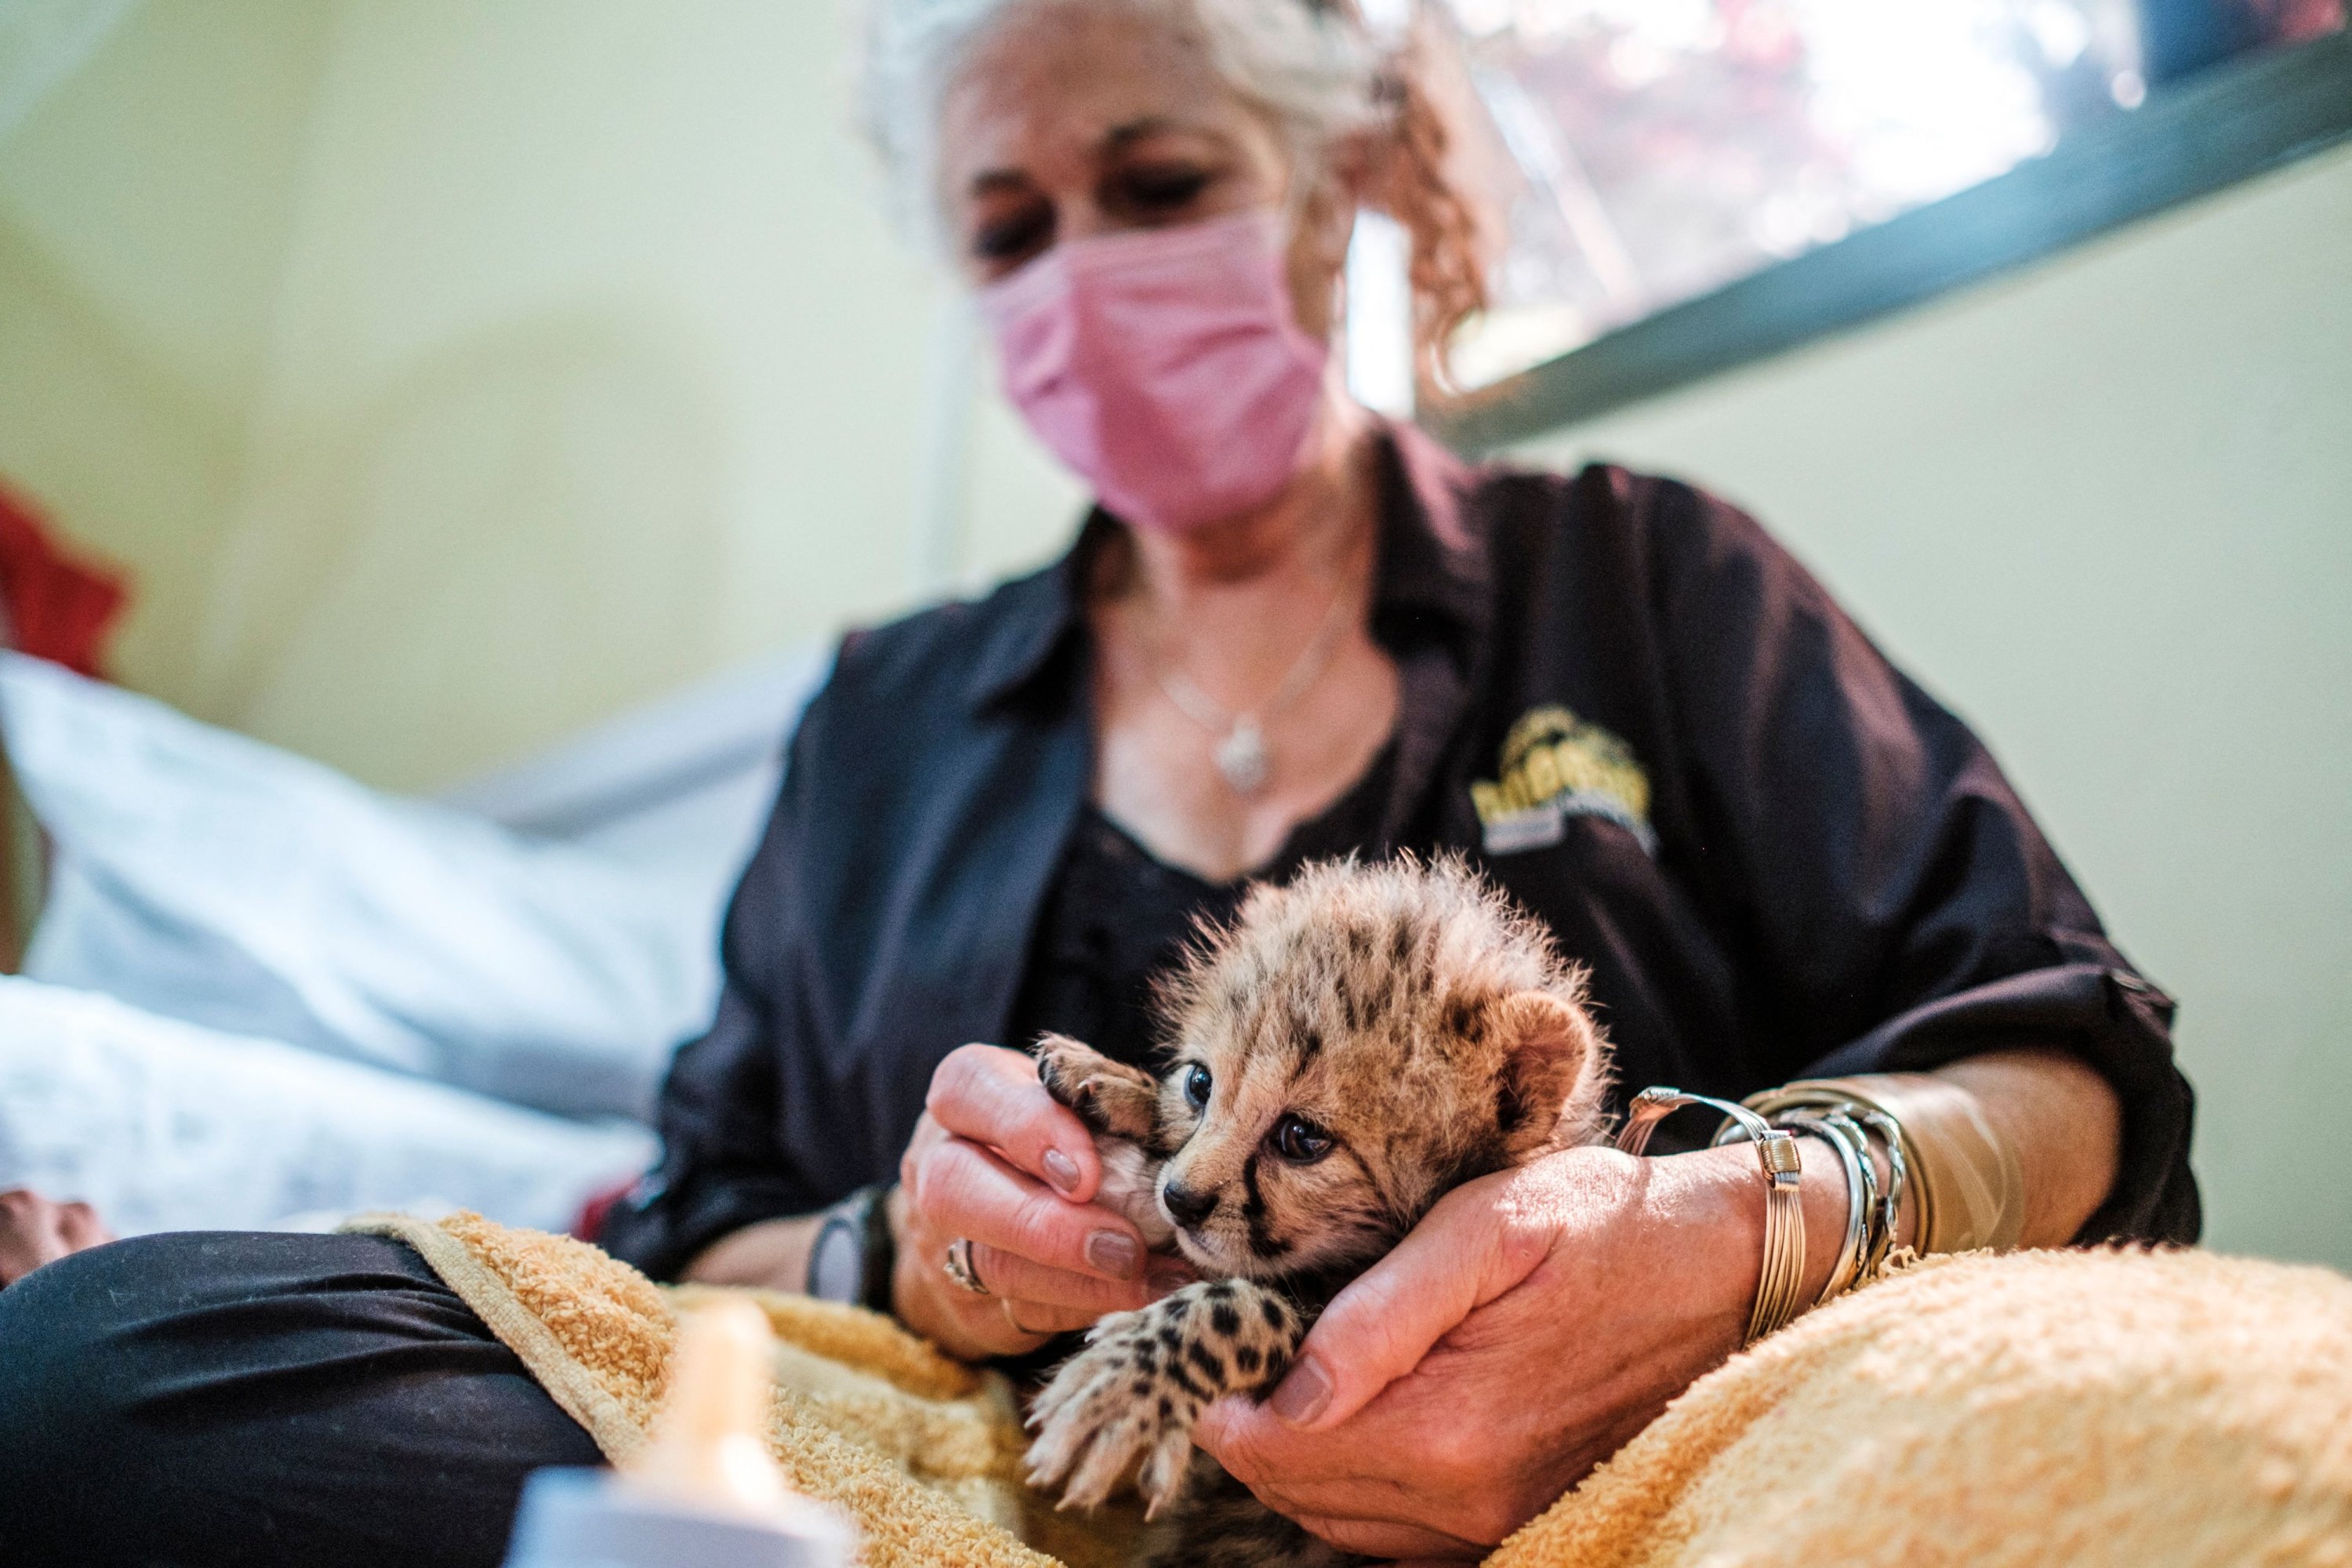 Laurie Marker, founder and executive director of the Cheetah Conservation Fund, holds a baby cheetah in one of the facilities of the organization in the city of Hargeisa, Somaliland, on Sep. 17, 2021. (AFP Photo)